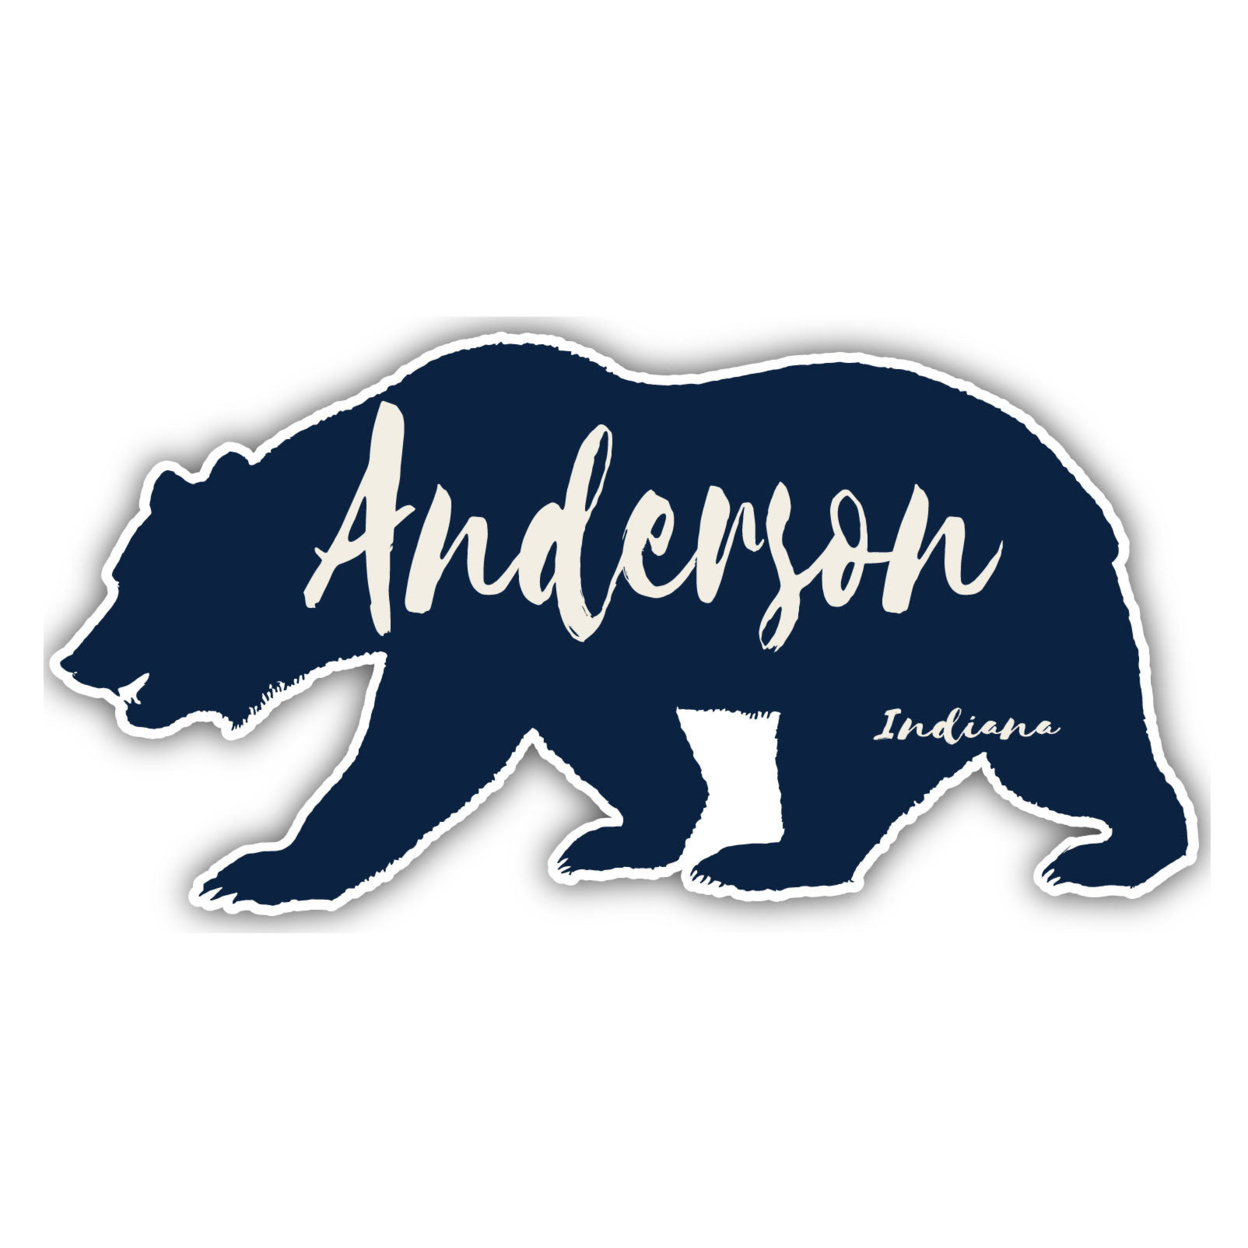 Anderson Indiana Souvenir Decorative Stickers (Choose Theme And Size) - Single Unit, 12-Inch, Bear